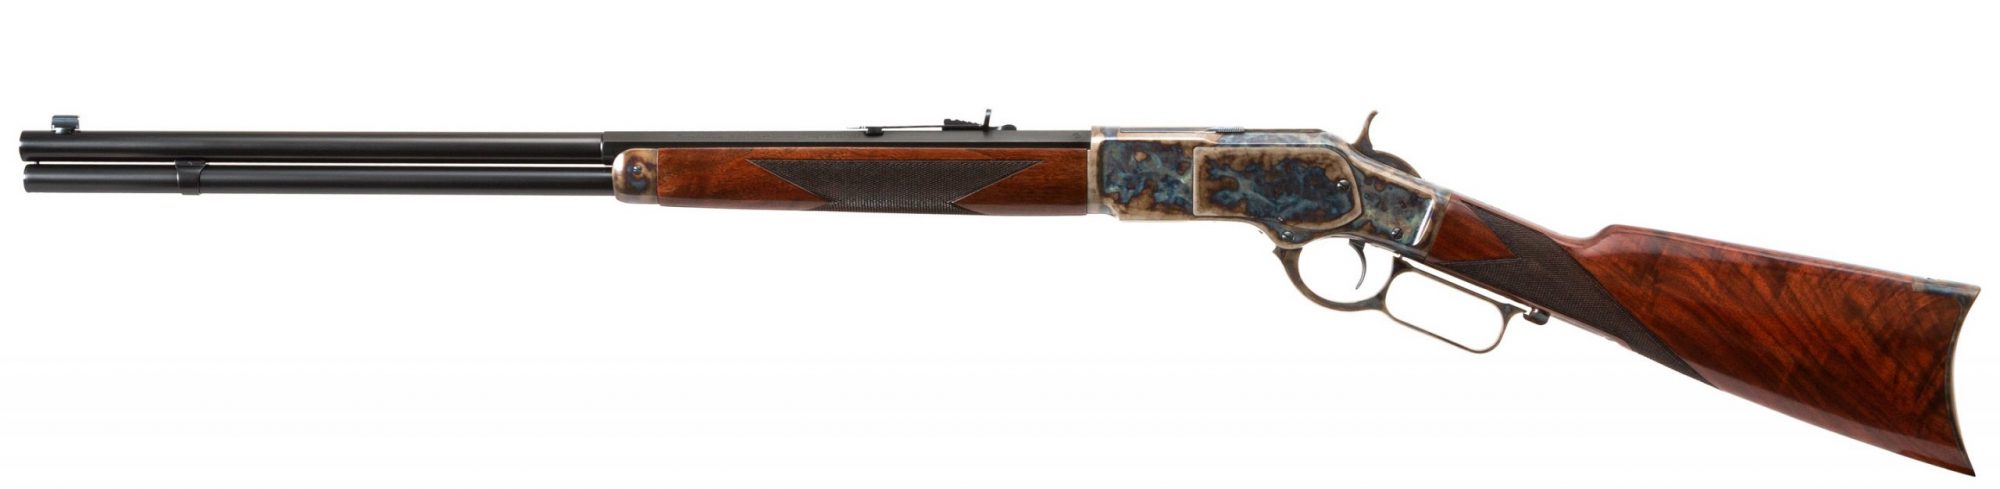 Photo of a Turnbull Finished Winchester 1873 Deluxe Sporter, featuring bone charcoal color case hardening